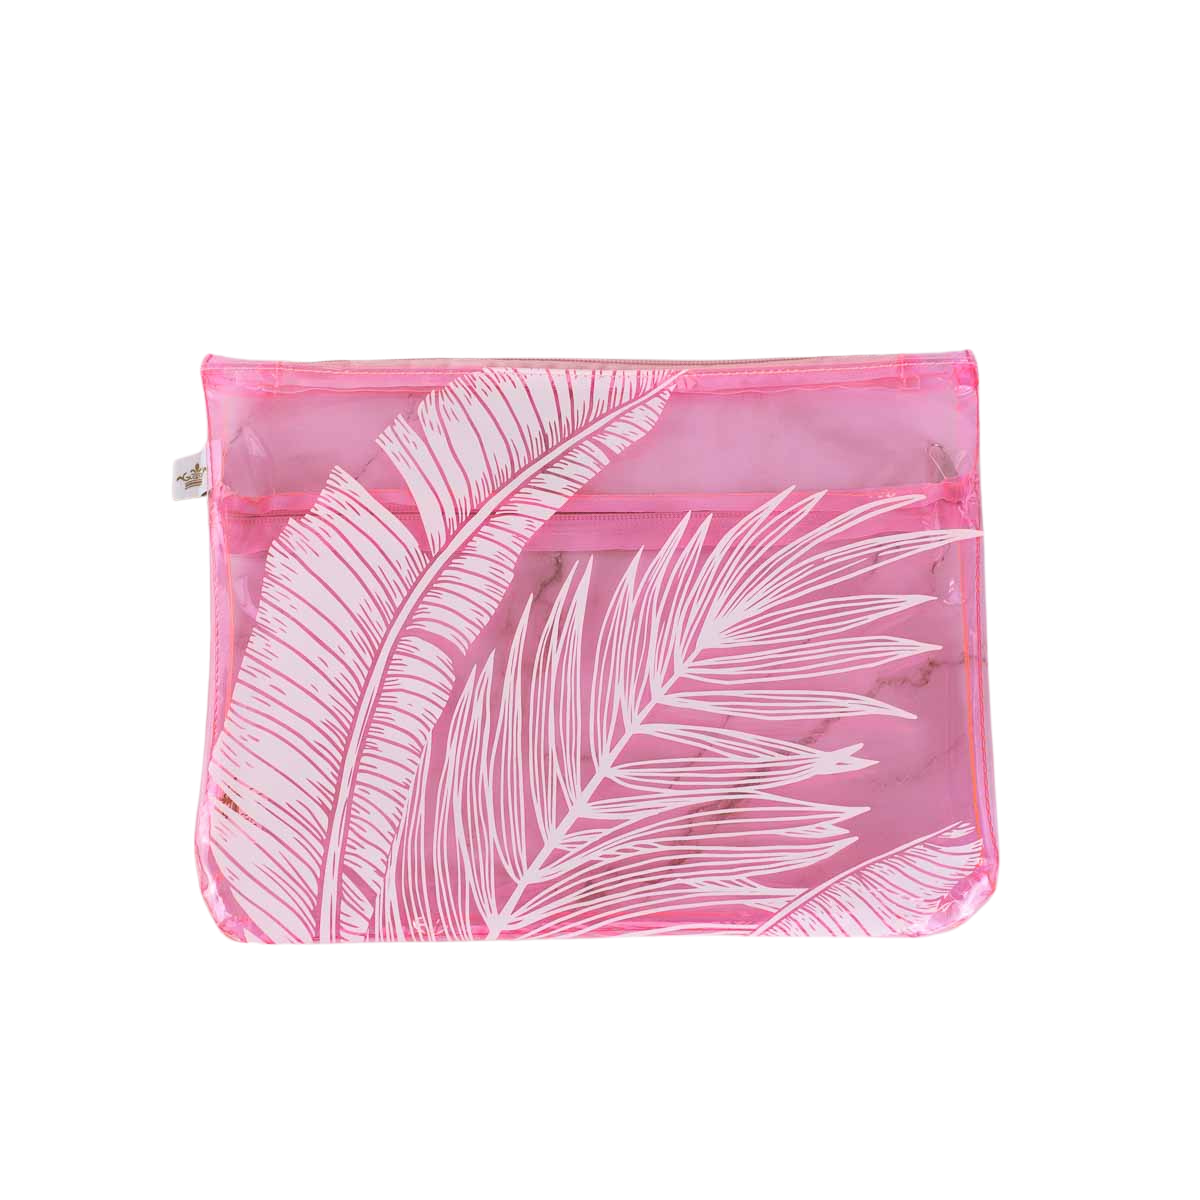 Delmare Palm Palisade Pouch - Light Pink